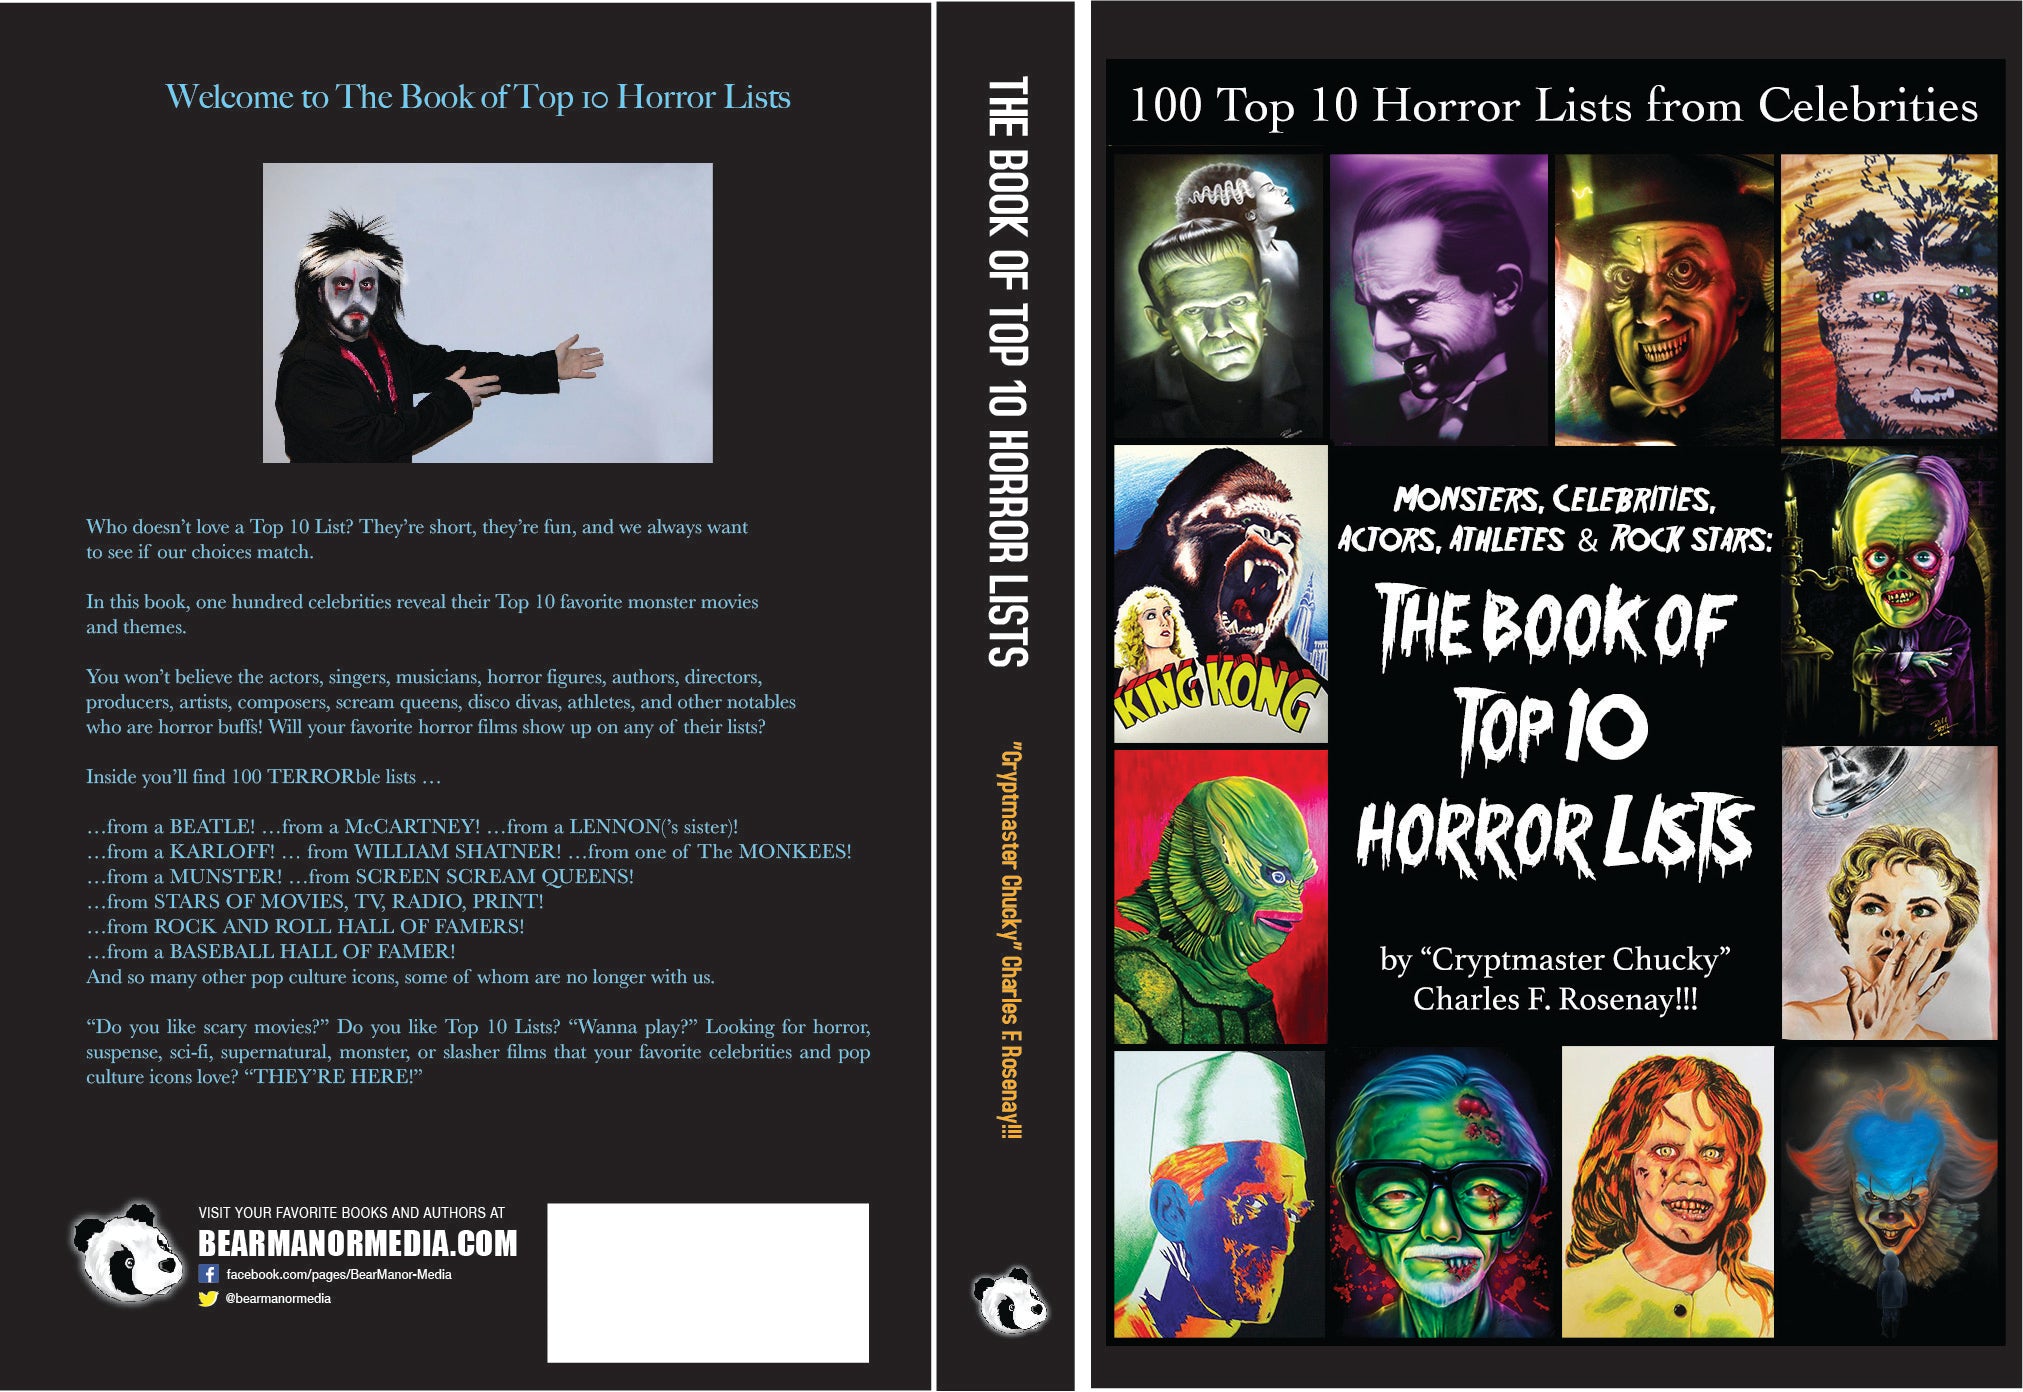 The Book of Top 10 Horror Lists (paperback)